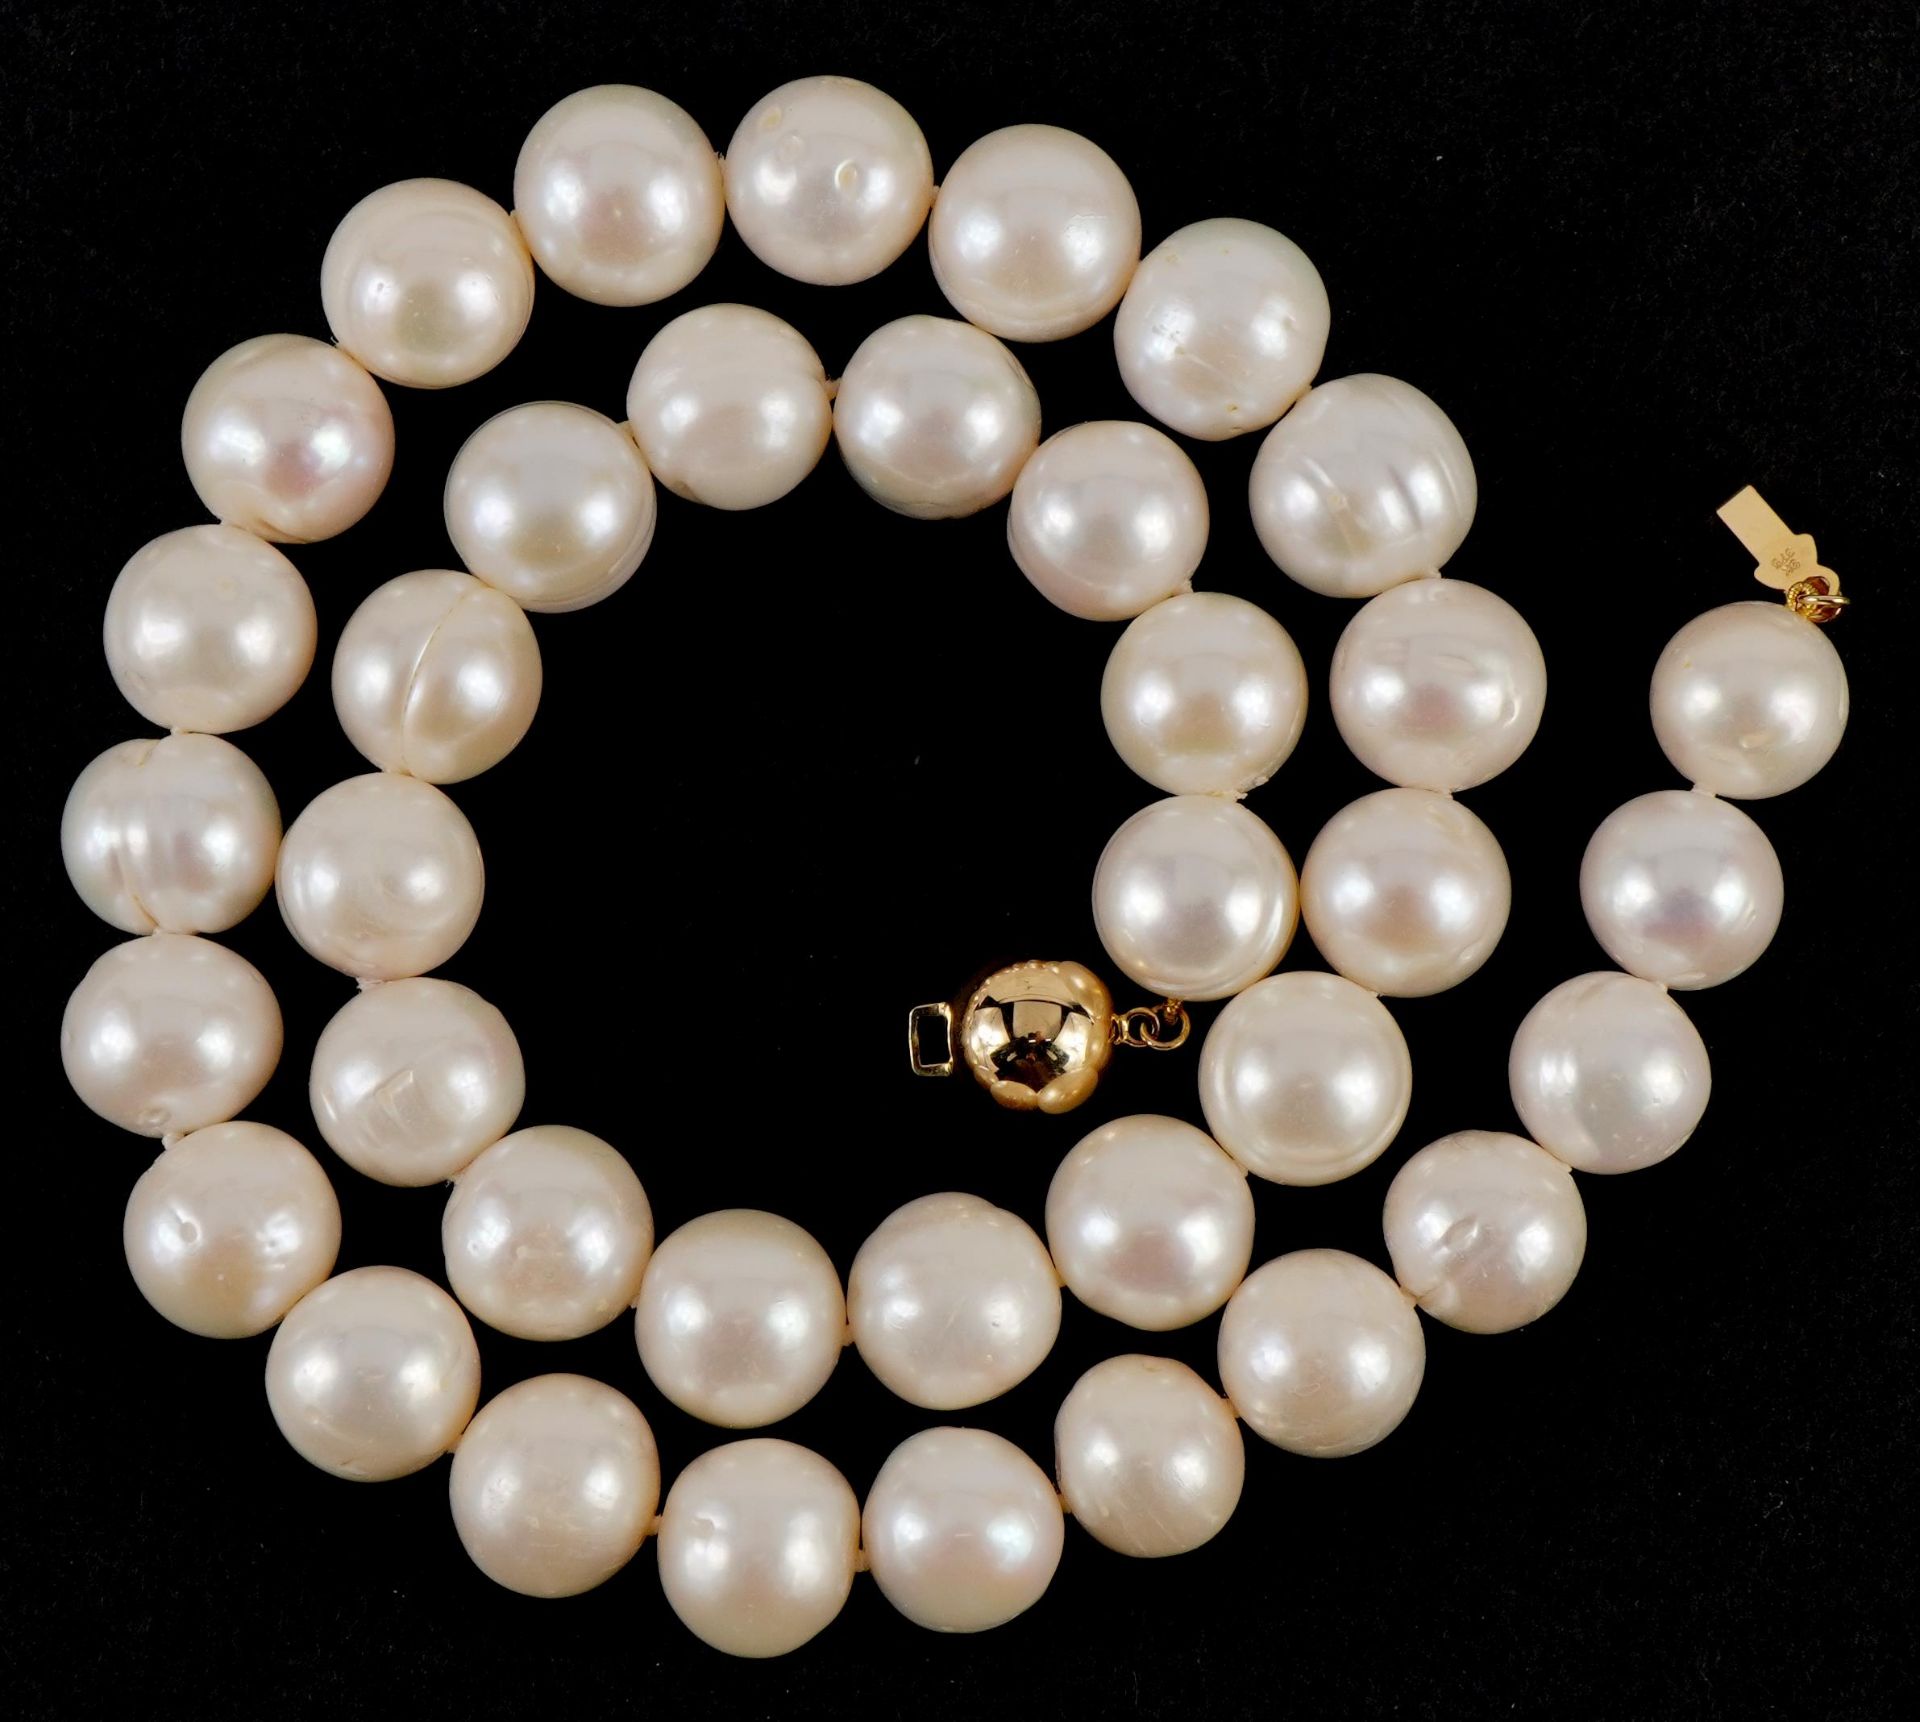 Large freshwater single string pearl necklace with 9ct gold ball clasp, 45cm in length, 86.6g - Image 2 of 3